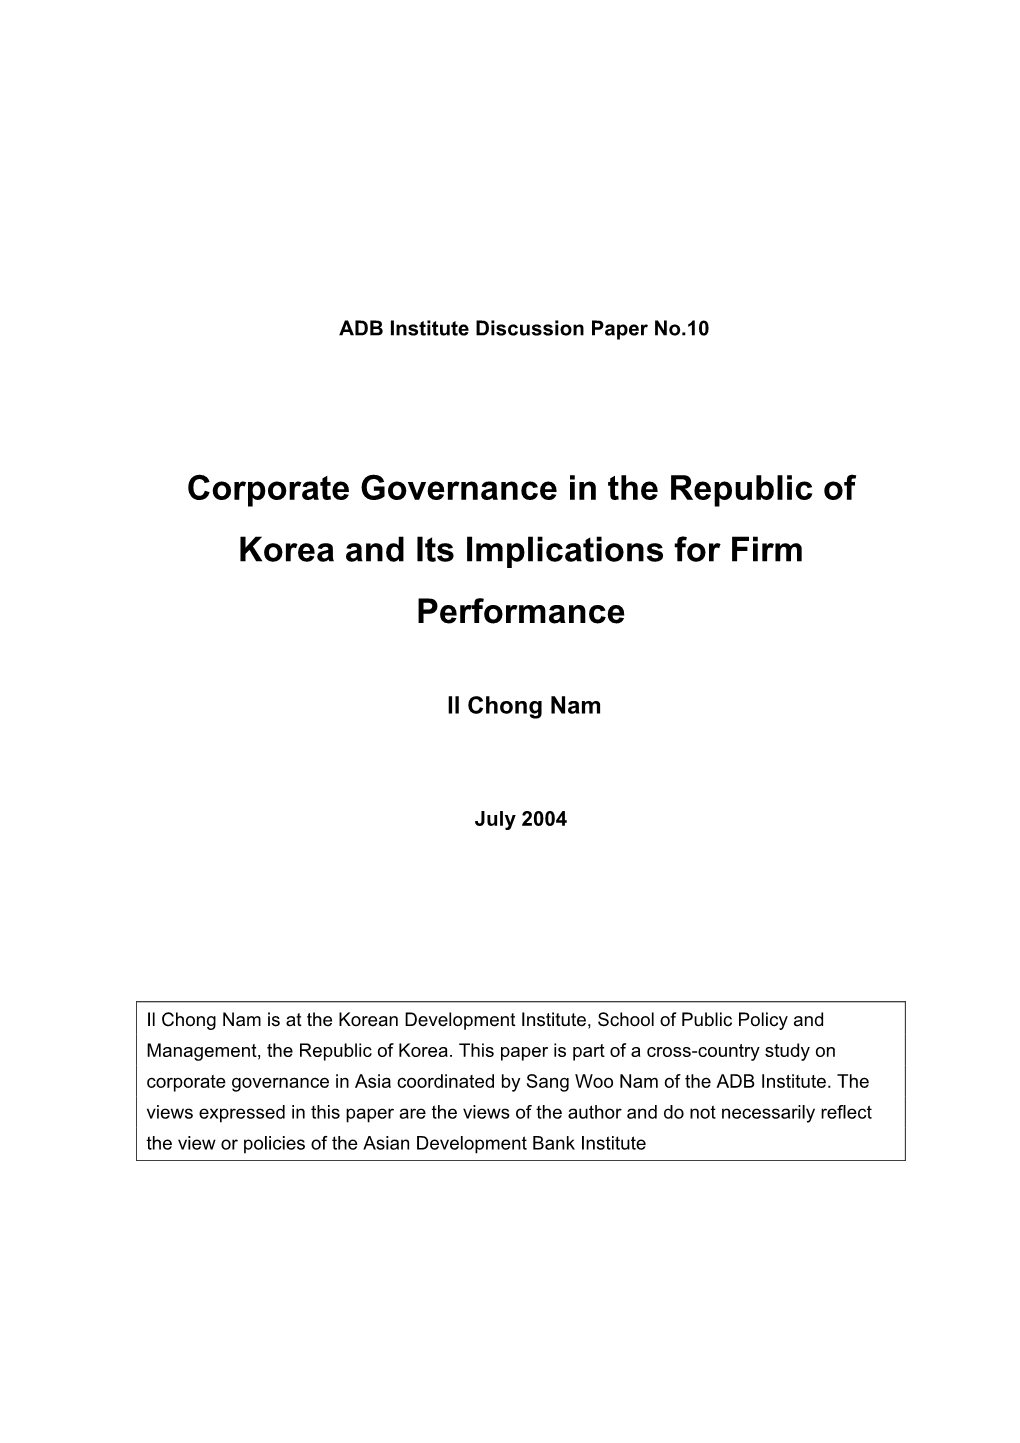 Corporate Governance in the Republic of Korea and Its Implications for Firm Performance